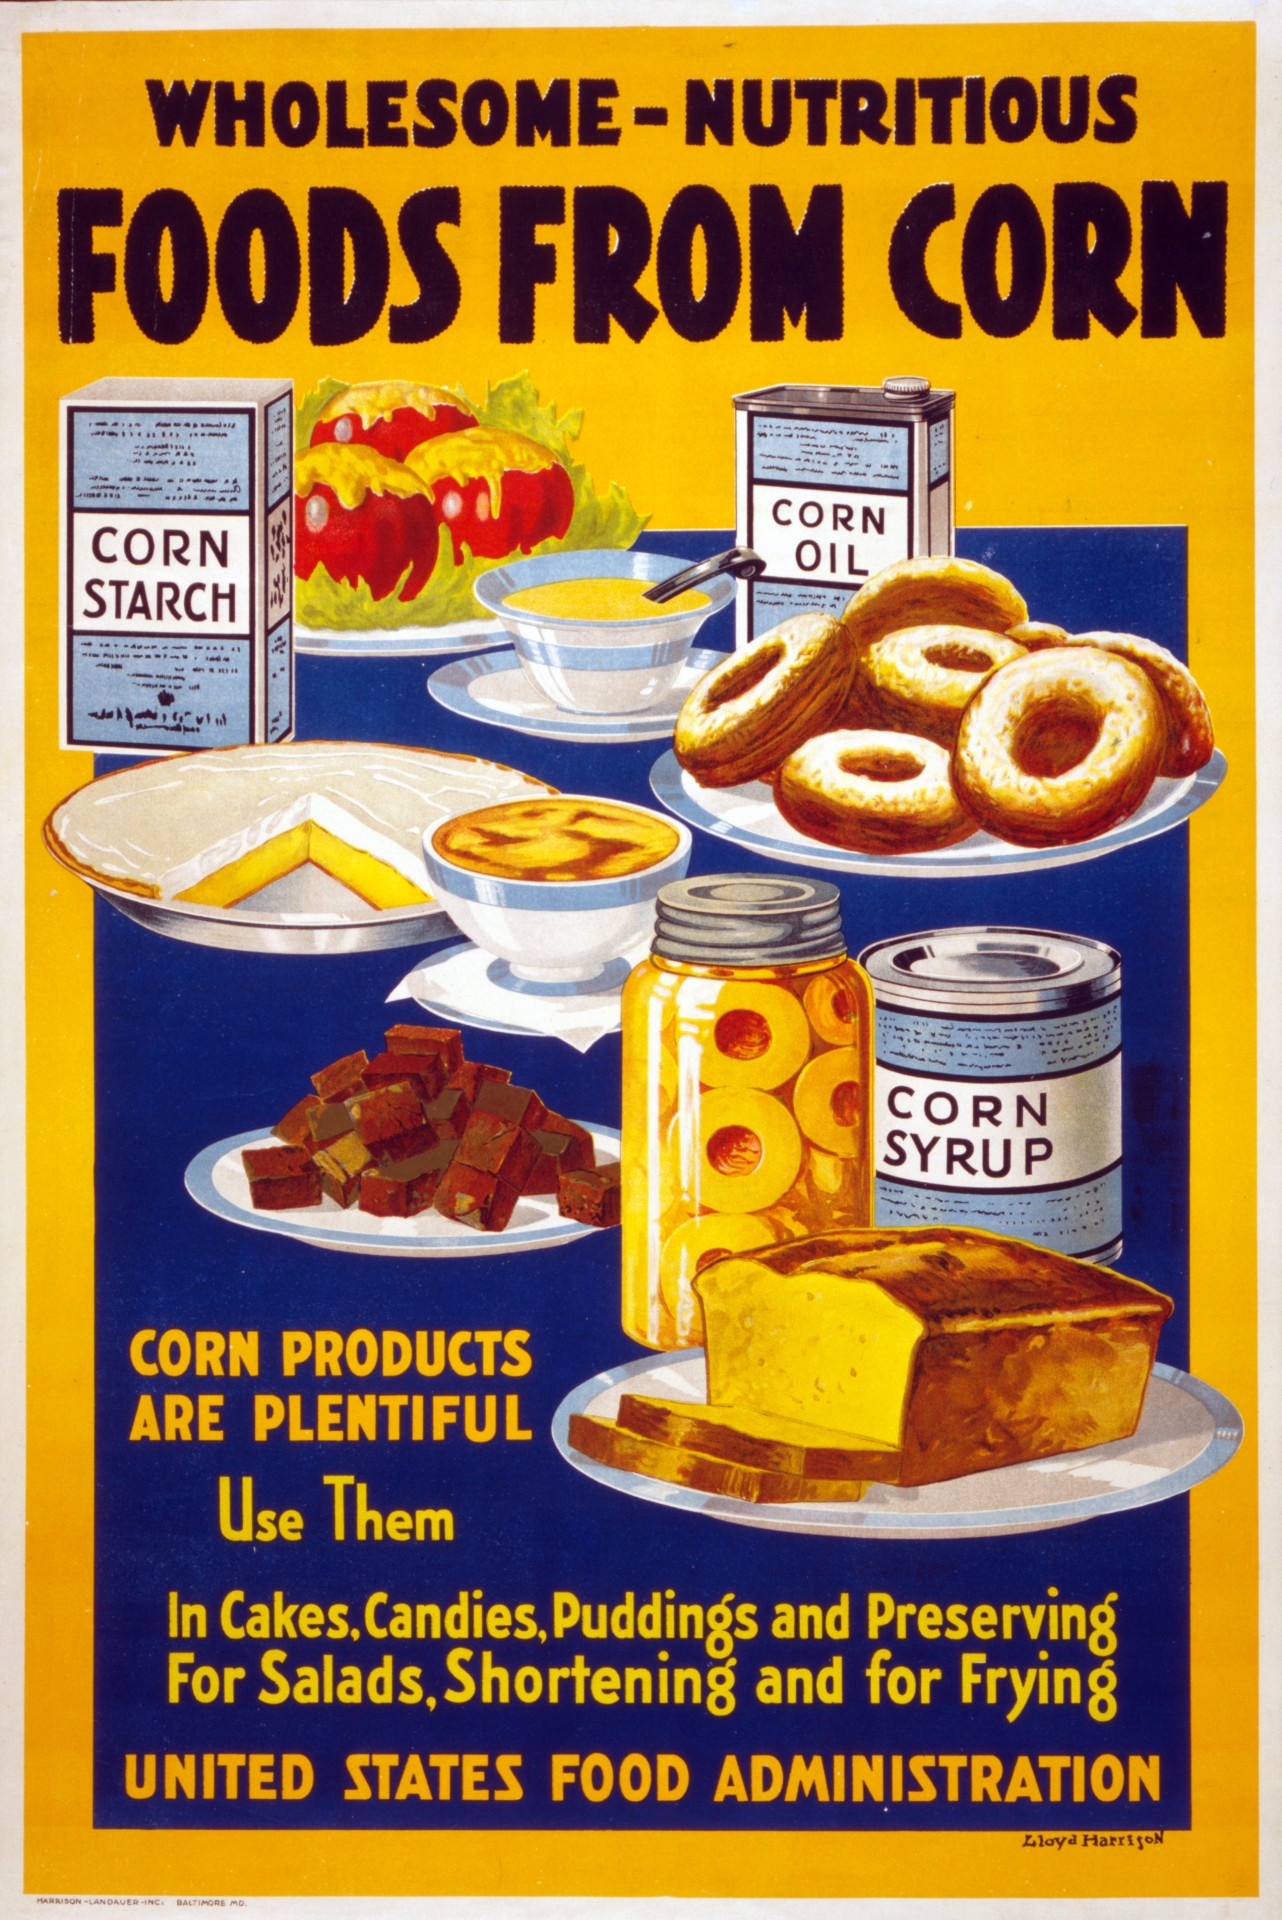 Public domain vintage poster of wholesome foods by the United States food administration